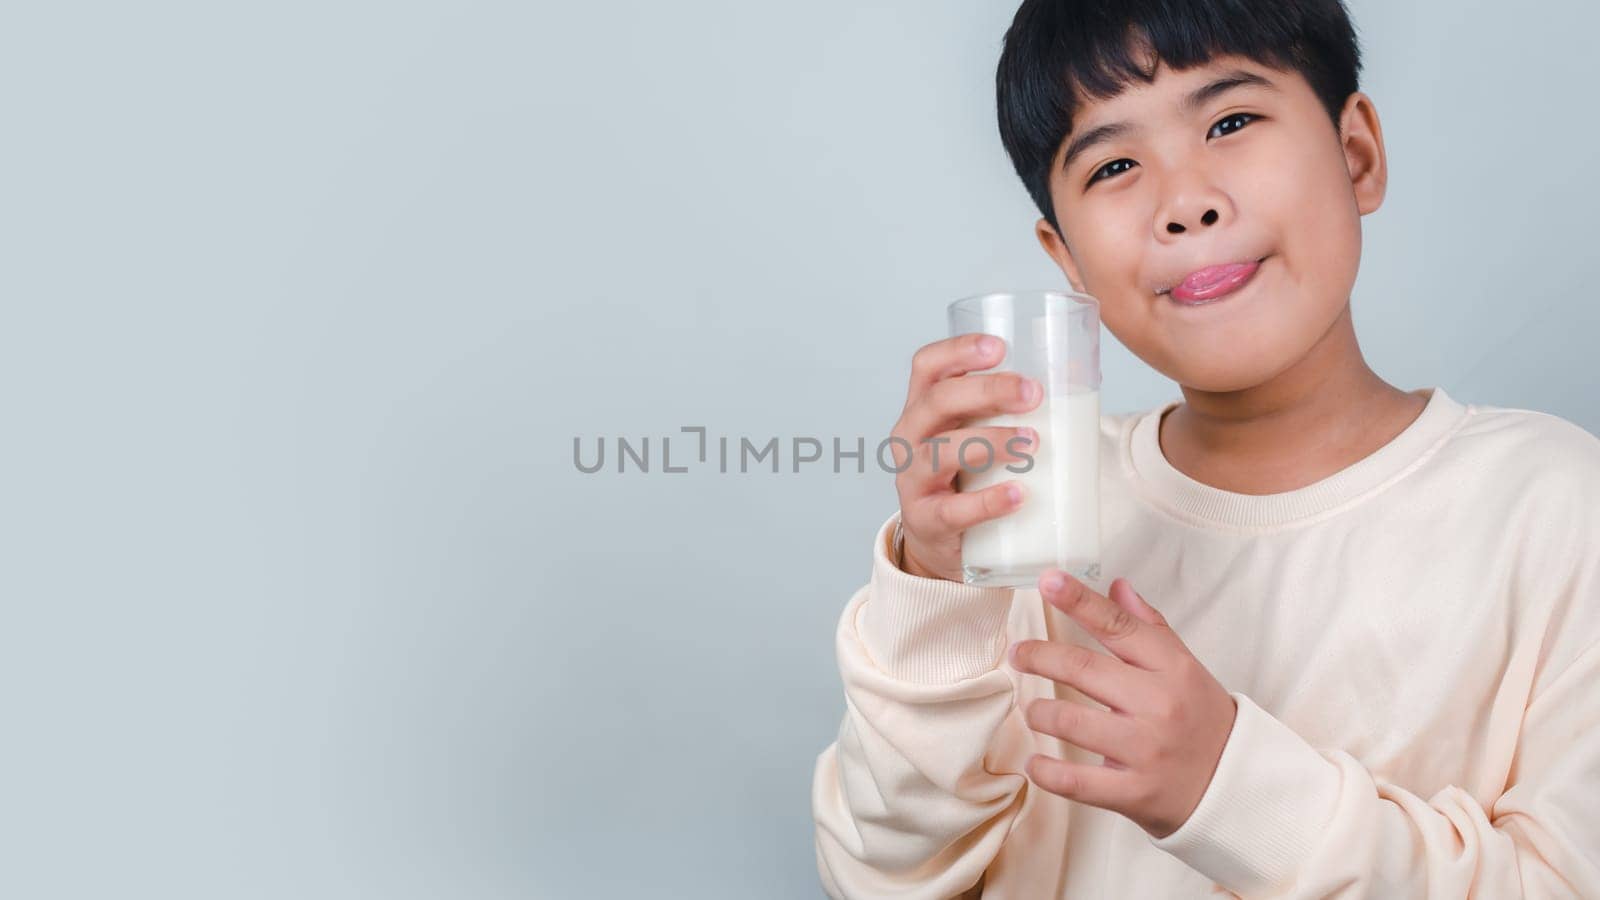 Concept of happy good nutrition, Portrait of a little young handsome kid boy in cream color shirt, Hold drinking milk box mockup, Isolated on white background. by Unimages2527